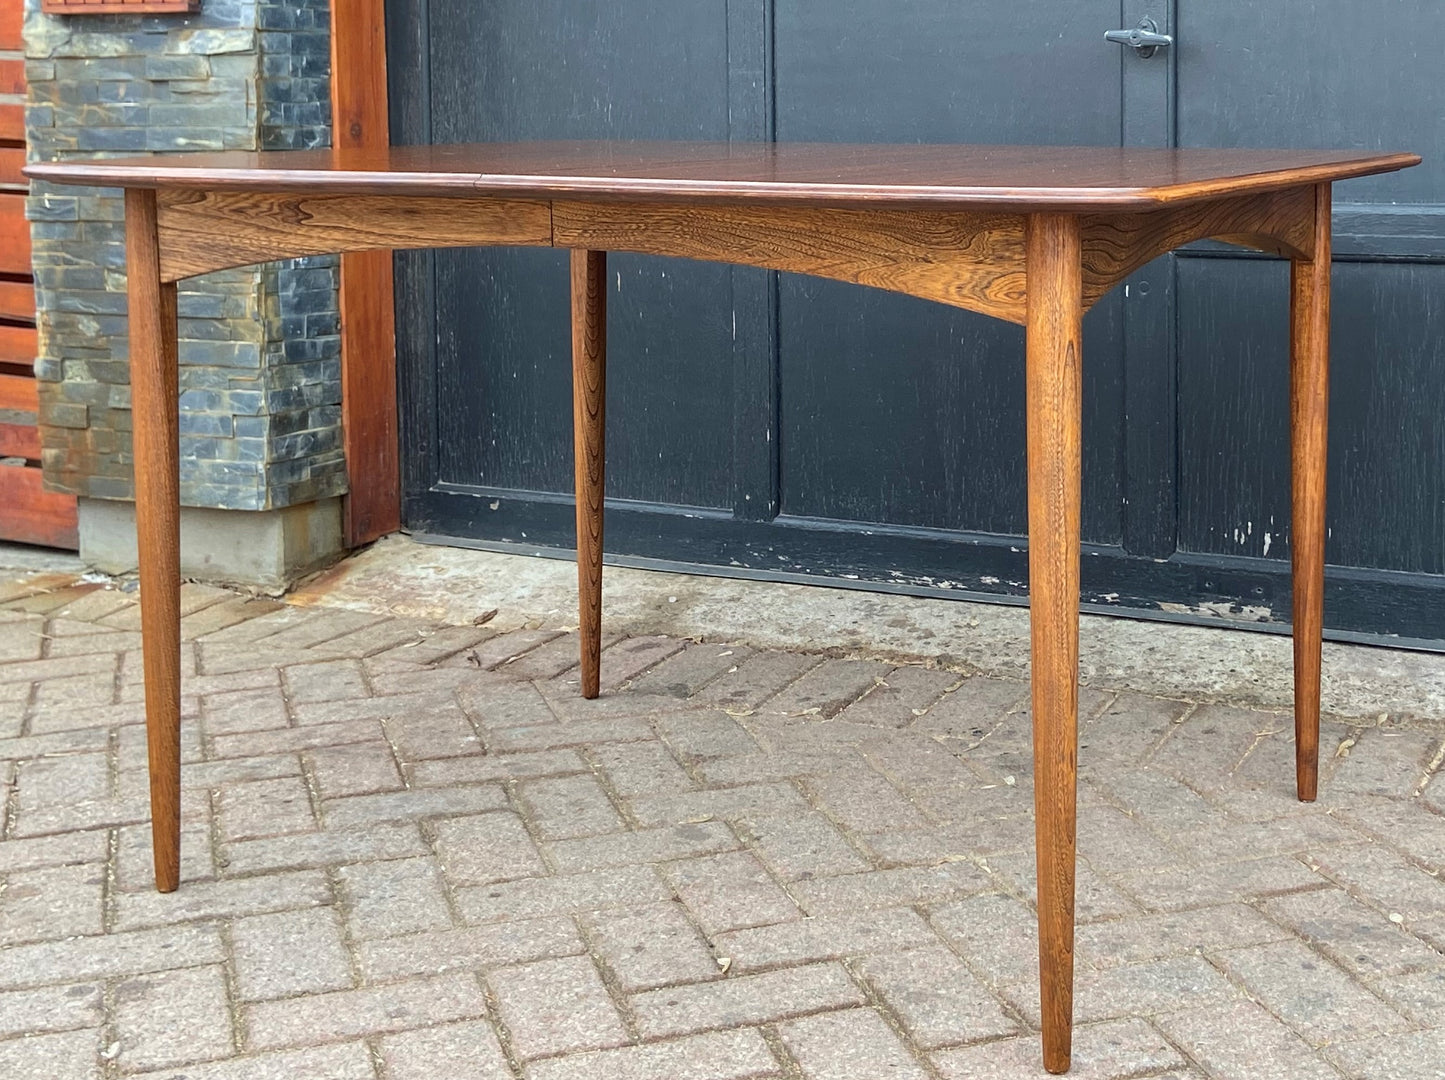 REFINISHED MCM Walnut Dining Table w 2 leaves by Deilcraft, Perfect, 4-6 ft